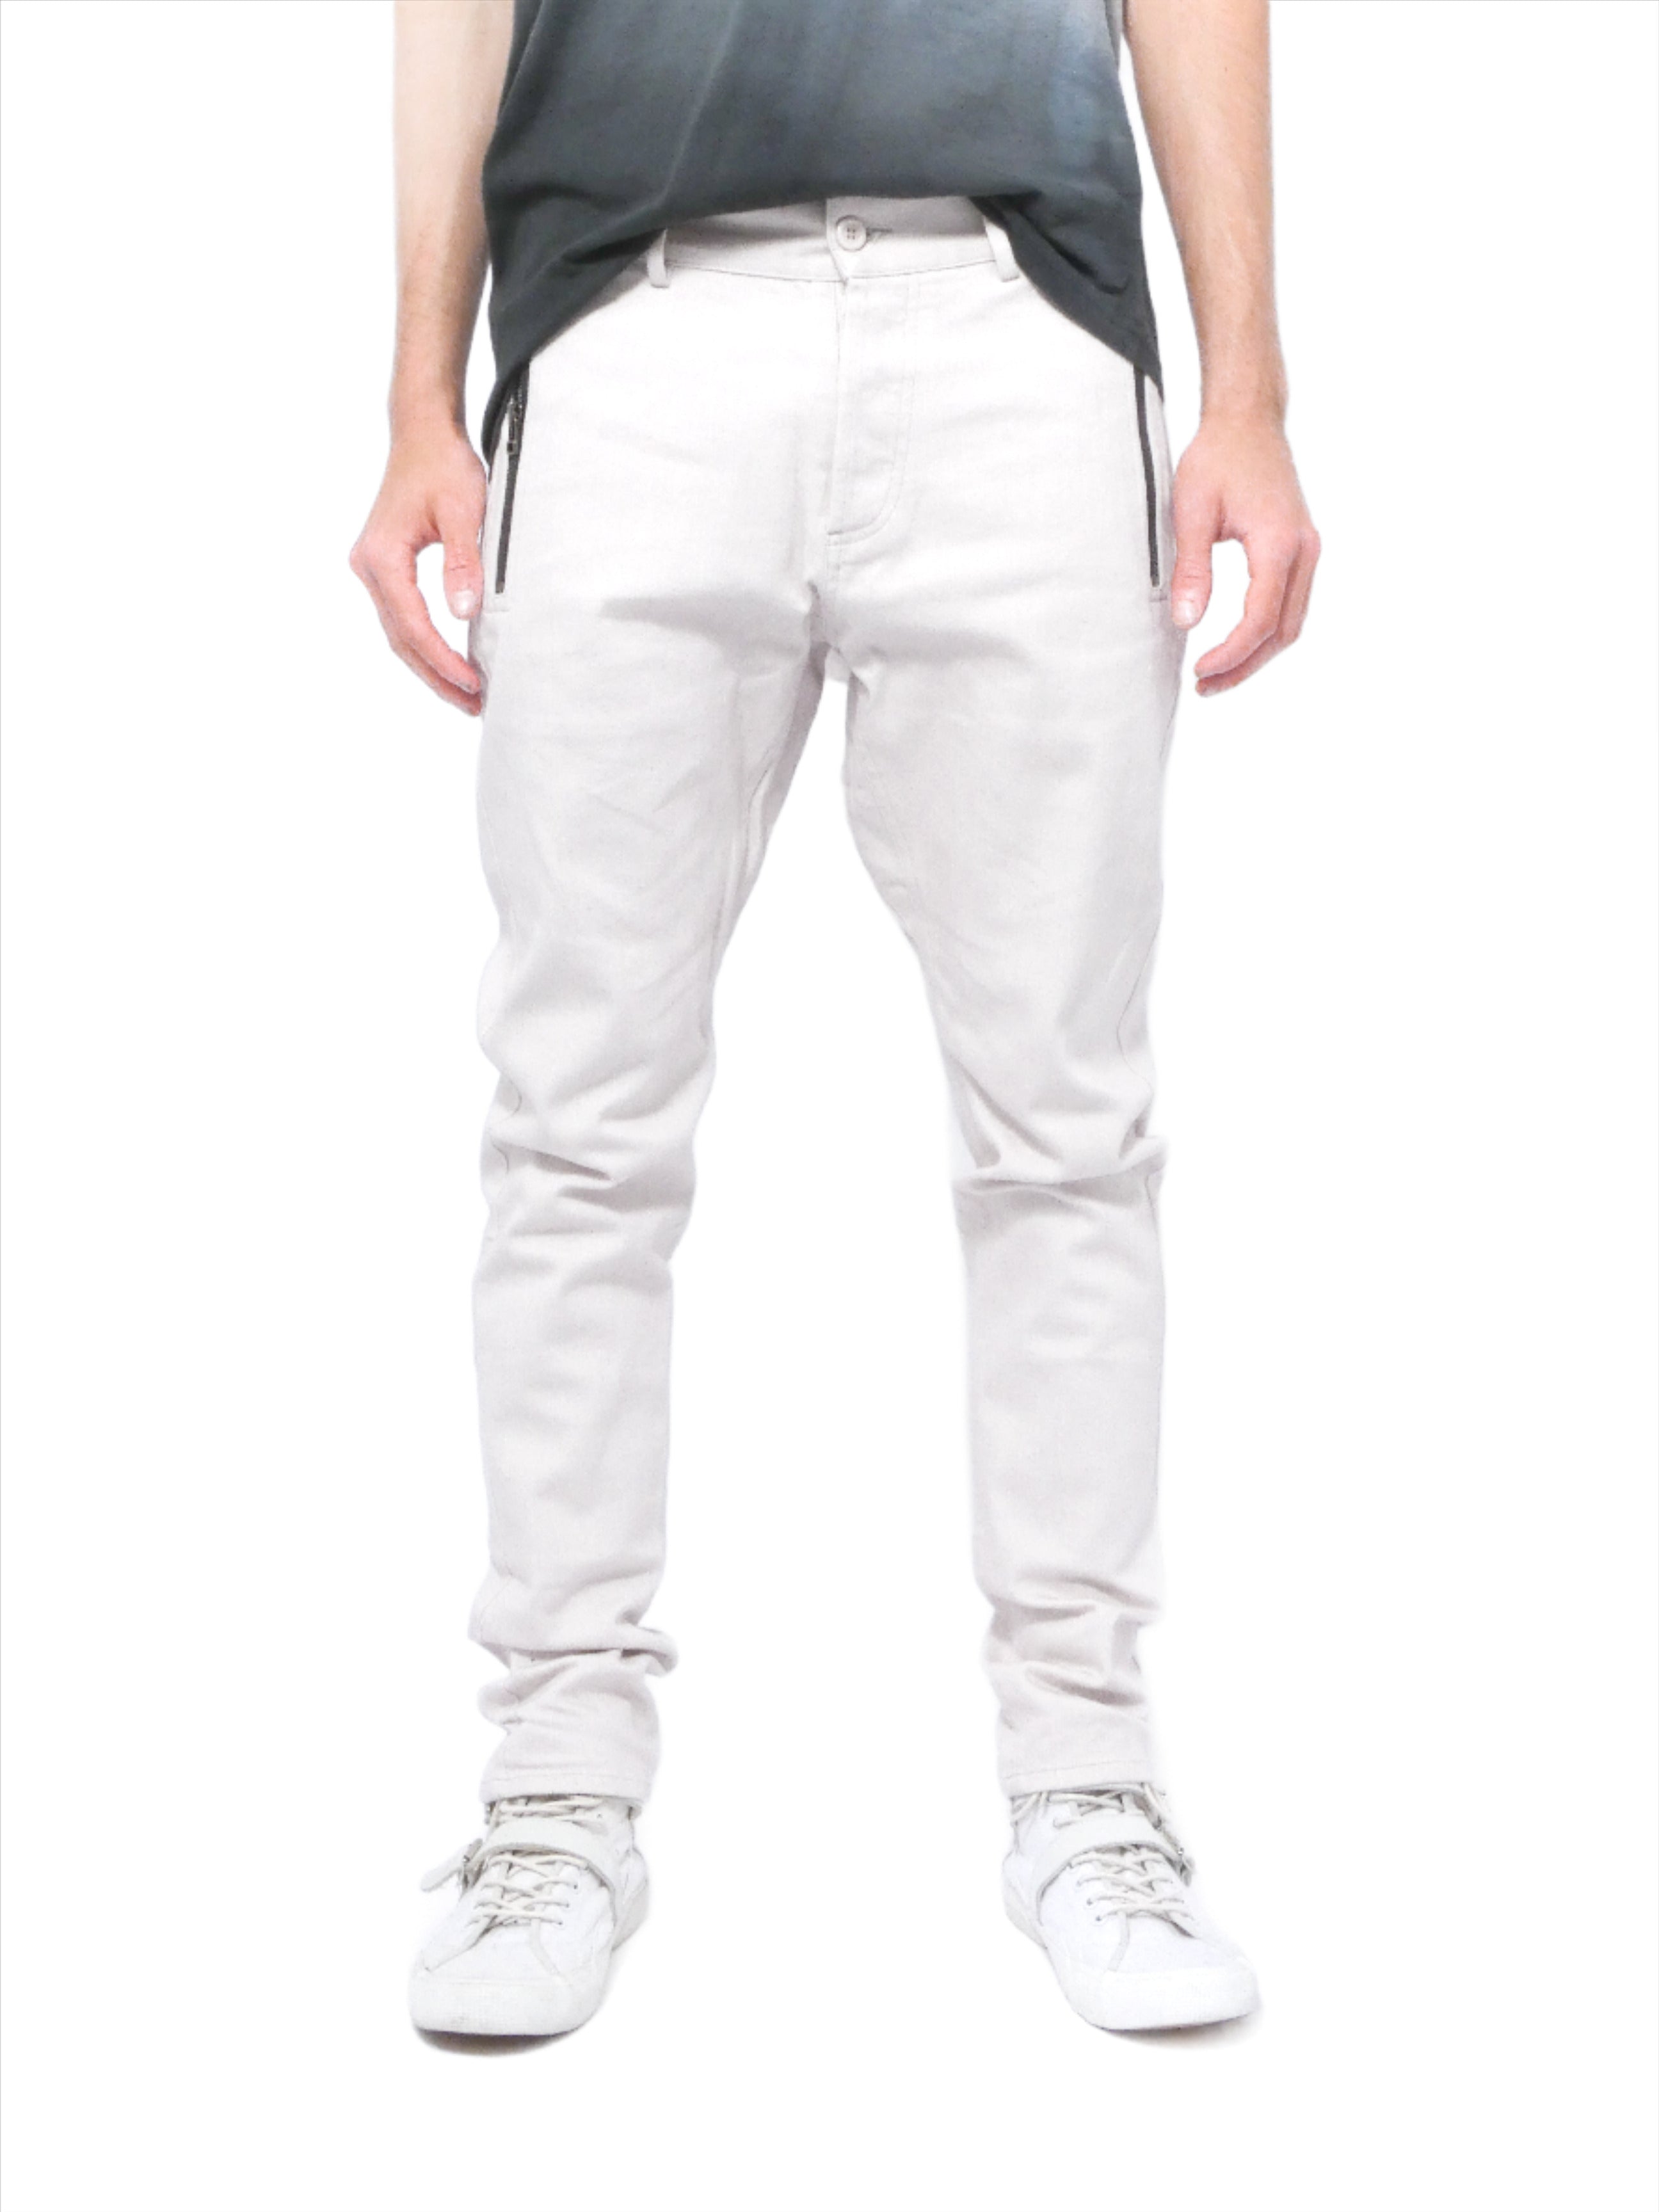 White Jeans With Black Zip Pockets